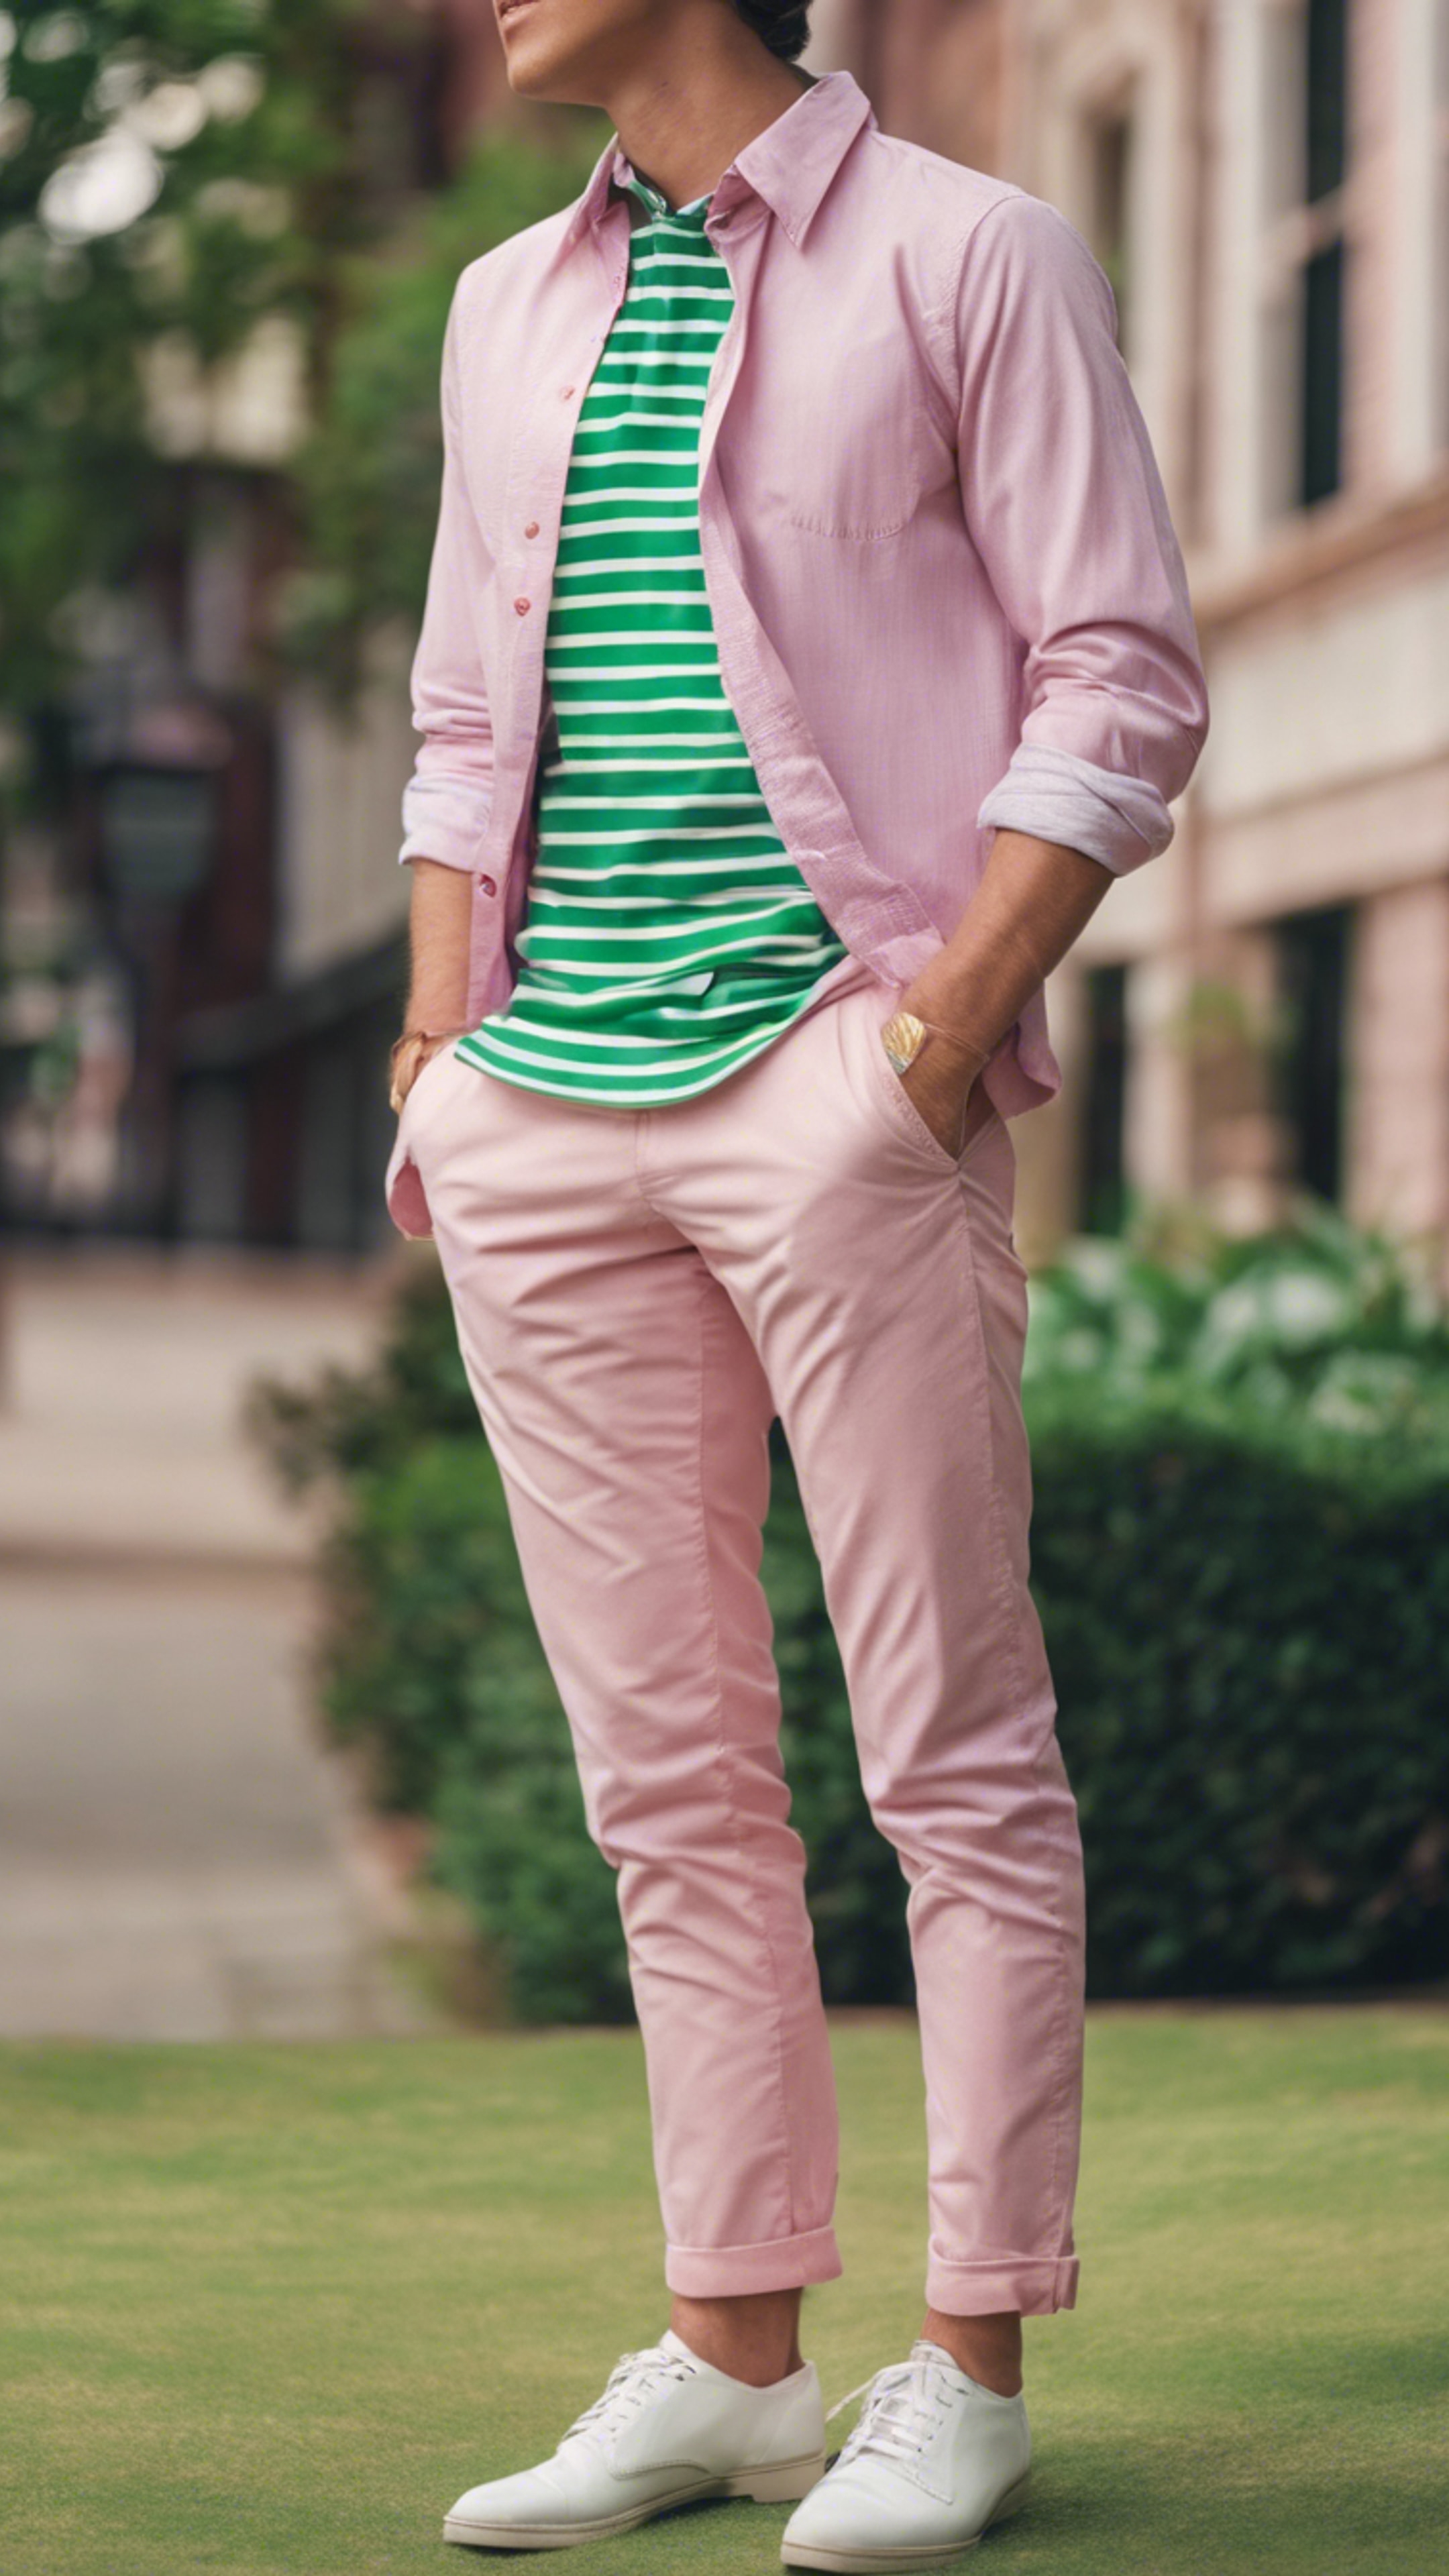 A classic preppy outfit in pink chinos with a green striped Oxford shirt. کاغذ دیواری[7b2809c9502f40299443]